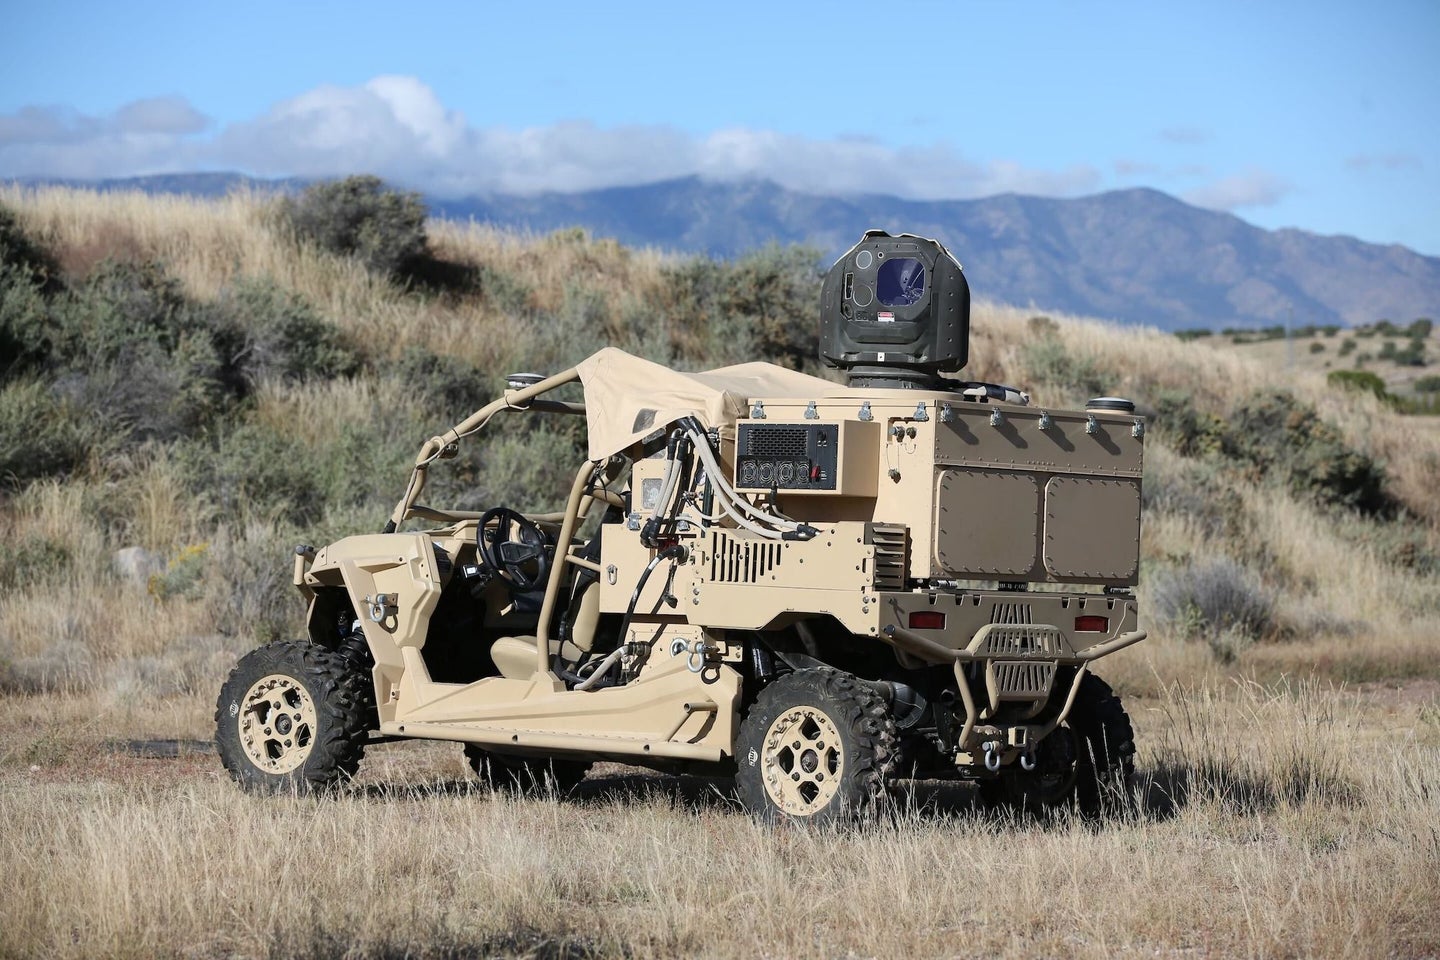 One of the two laser weapons was positioned on this vehicle.